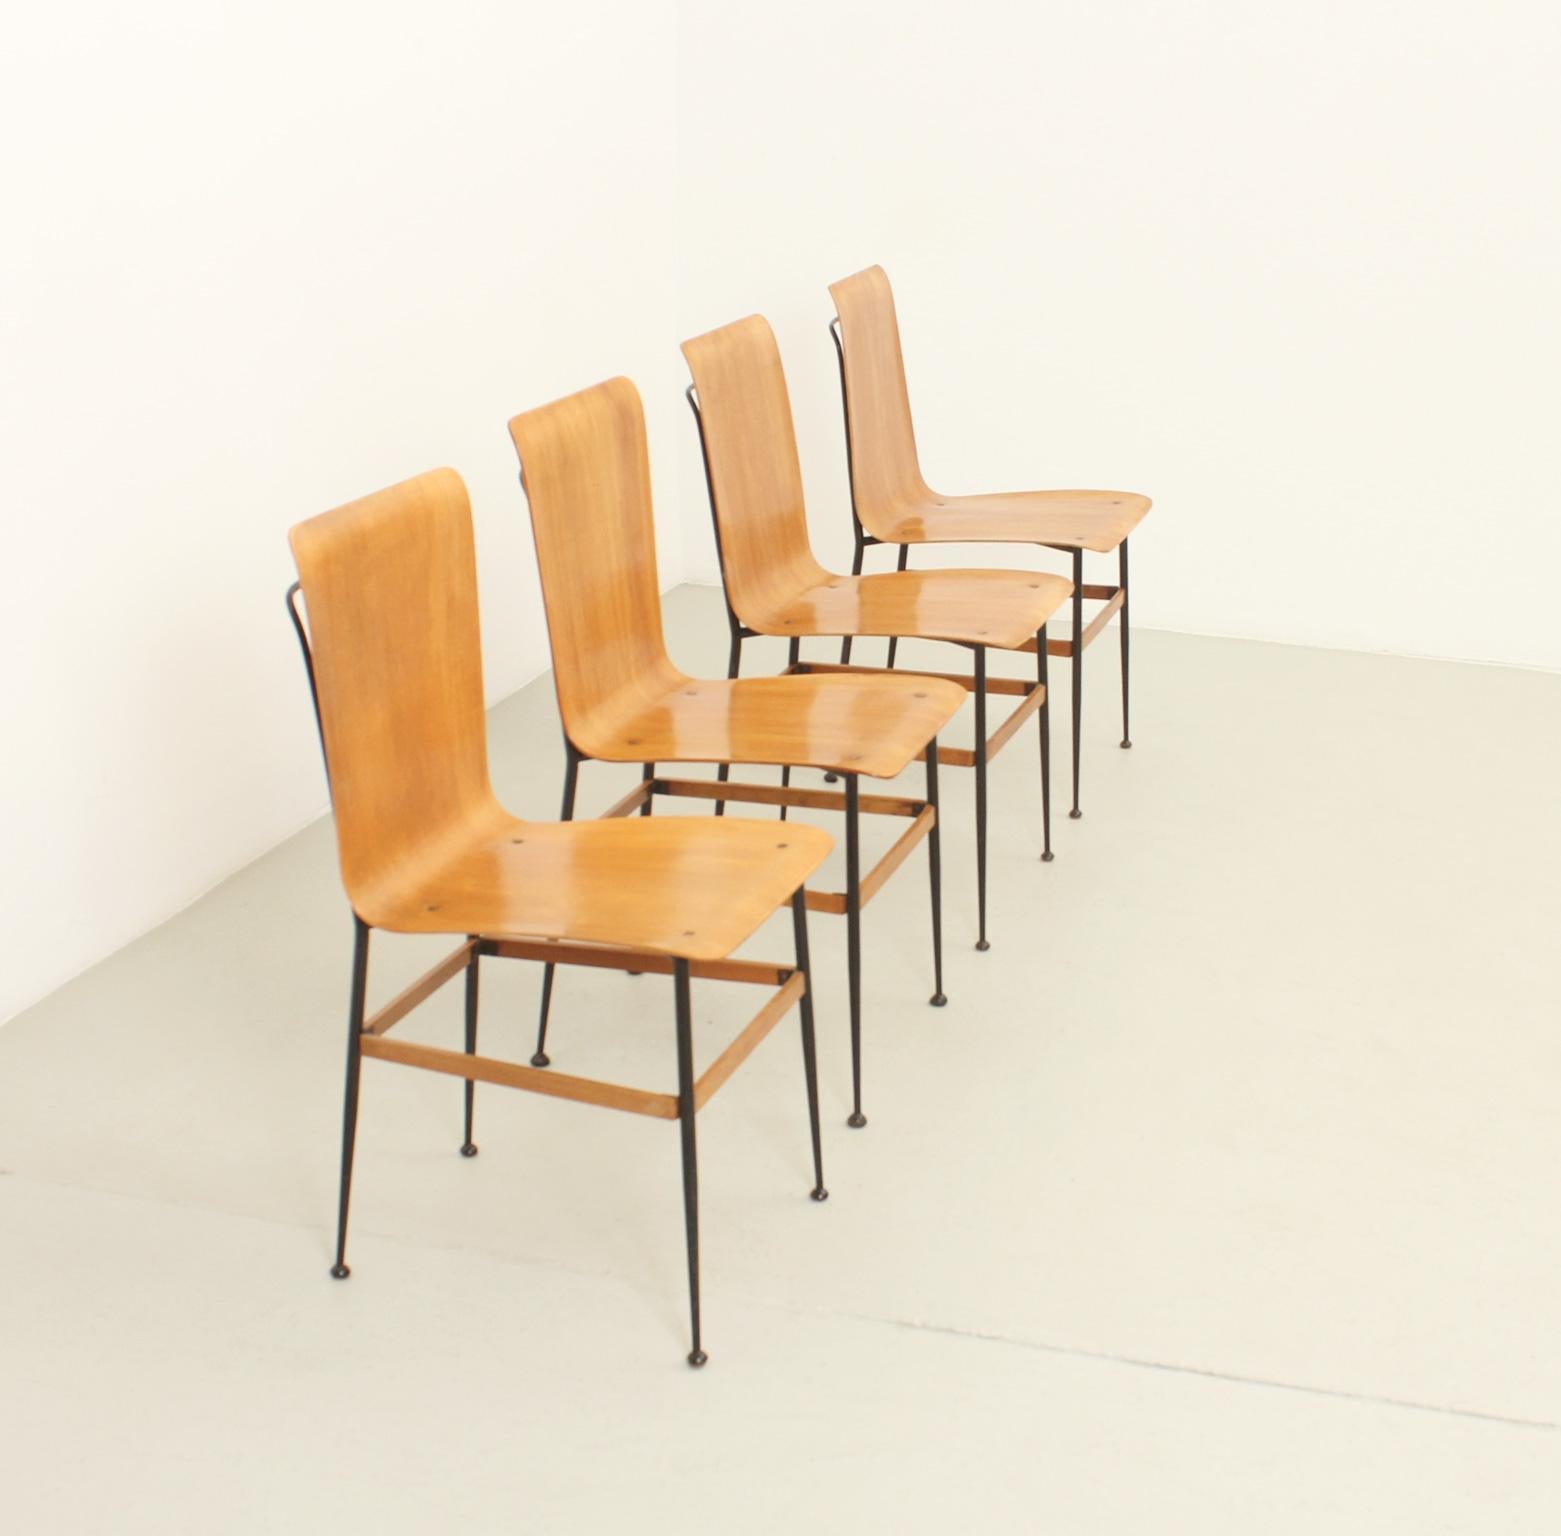 Mid-Century Modern Plywood Dining Chairs by Carlo Ratti, Italy, 1950s For Sale